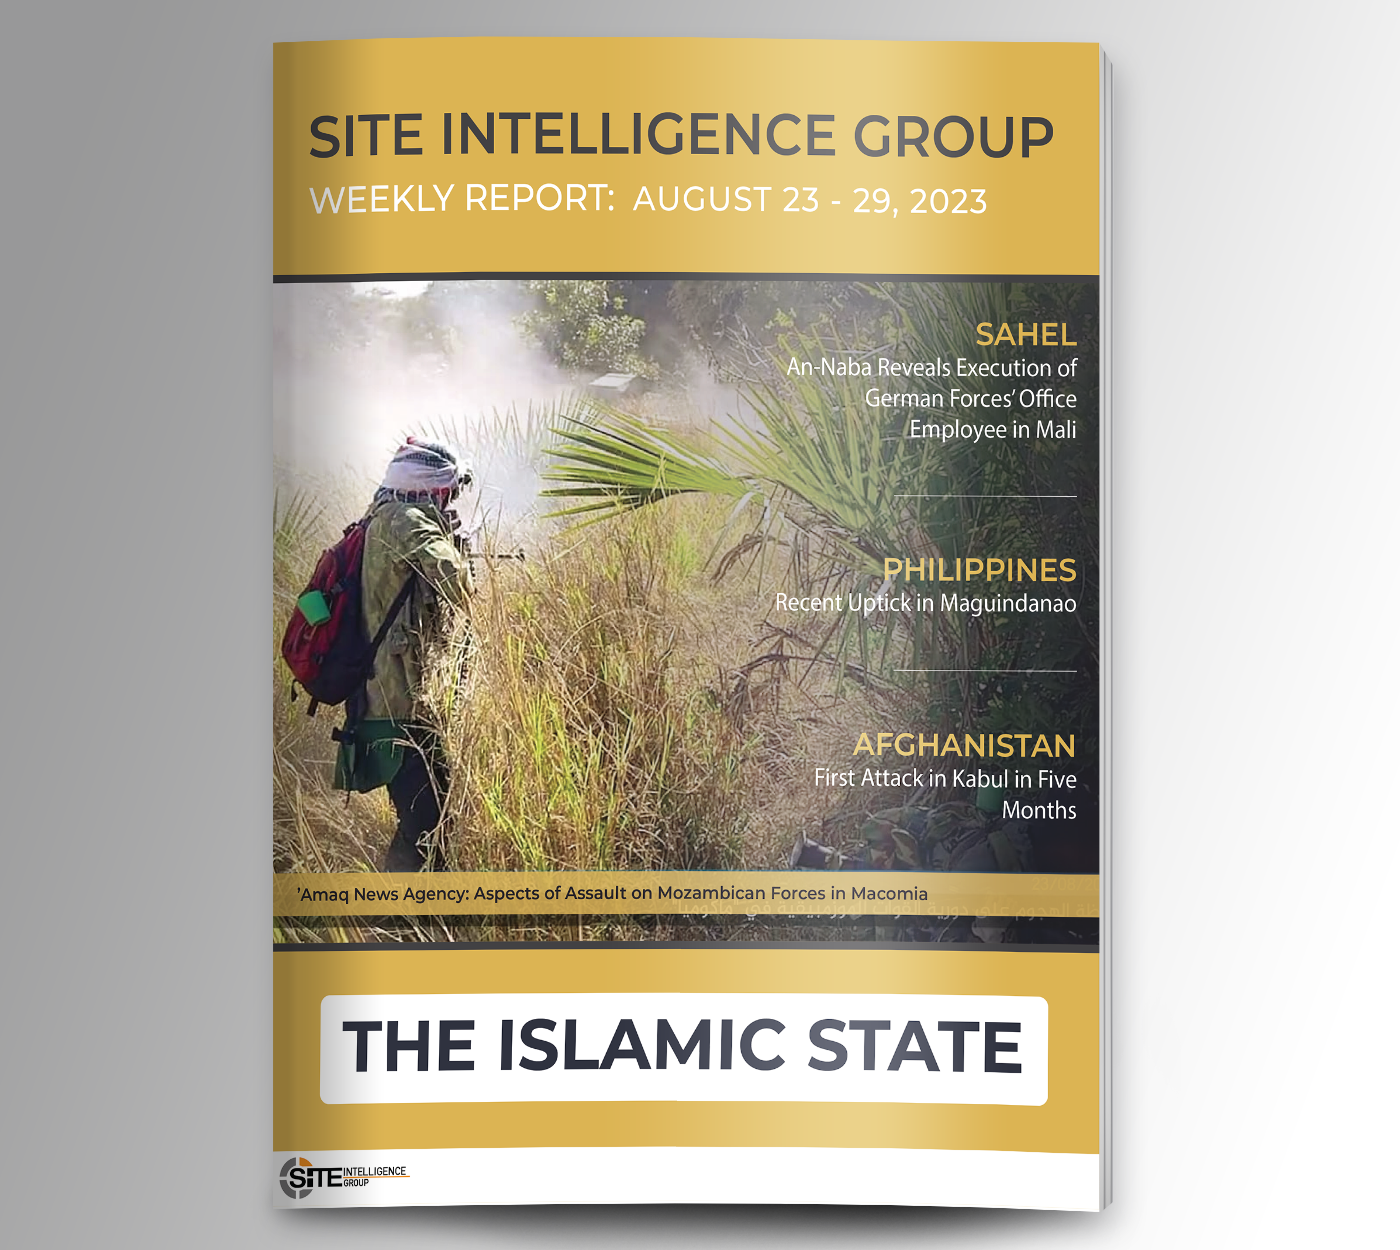 Weekly inSITE on the Islamic State for August 23-29, 2023